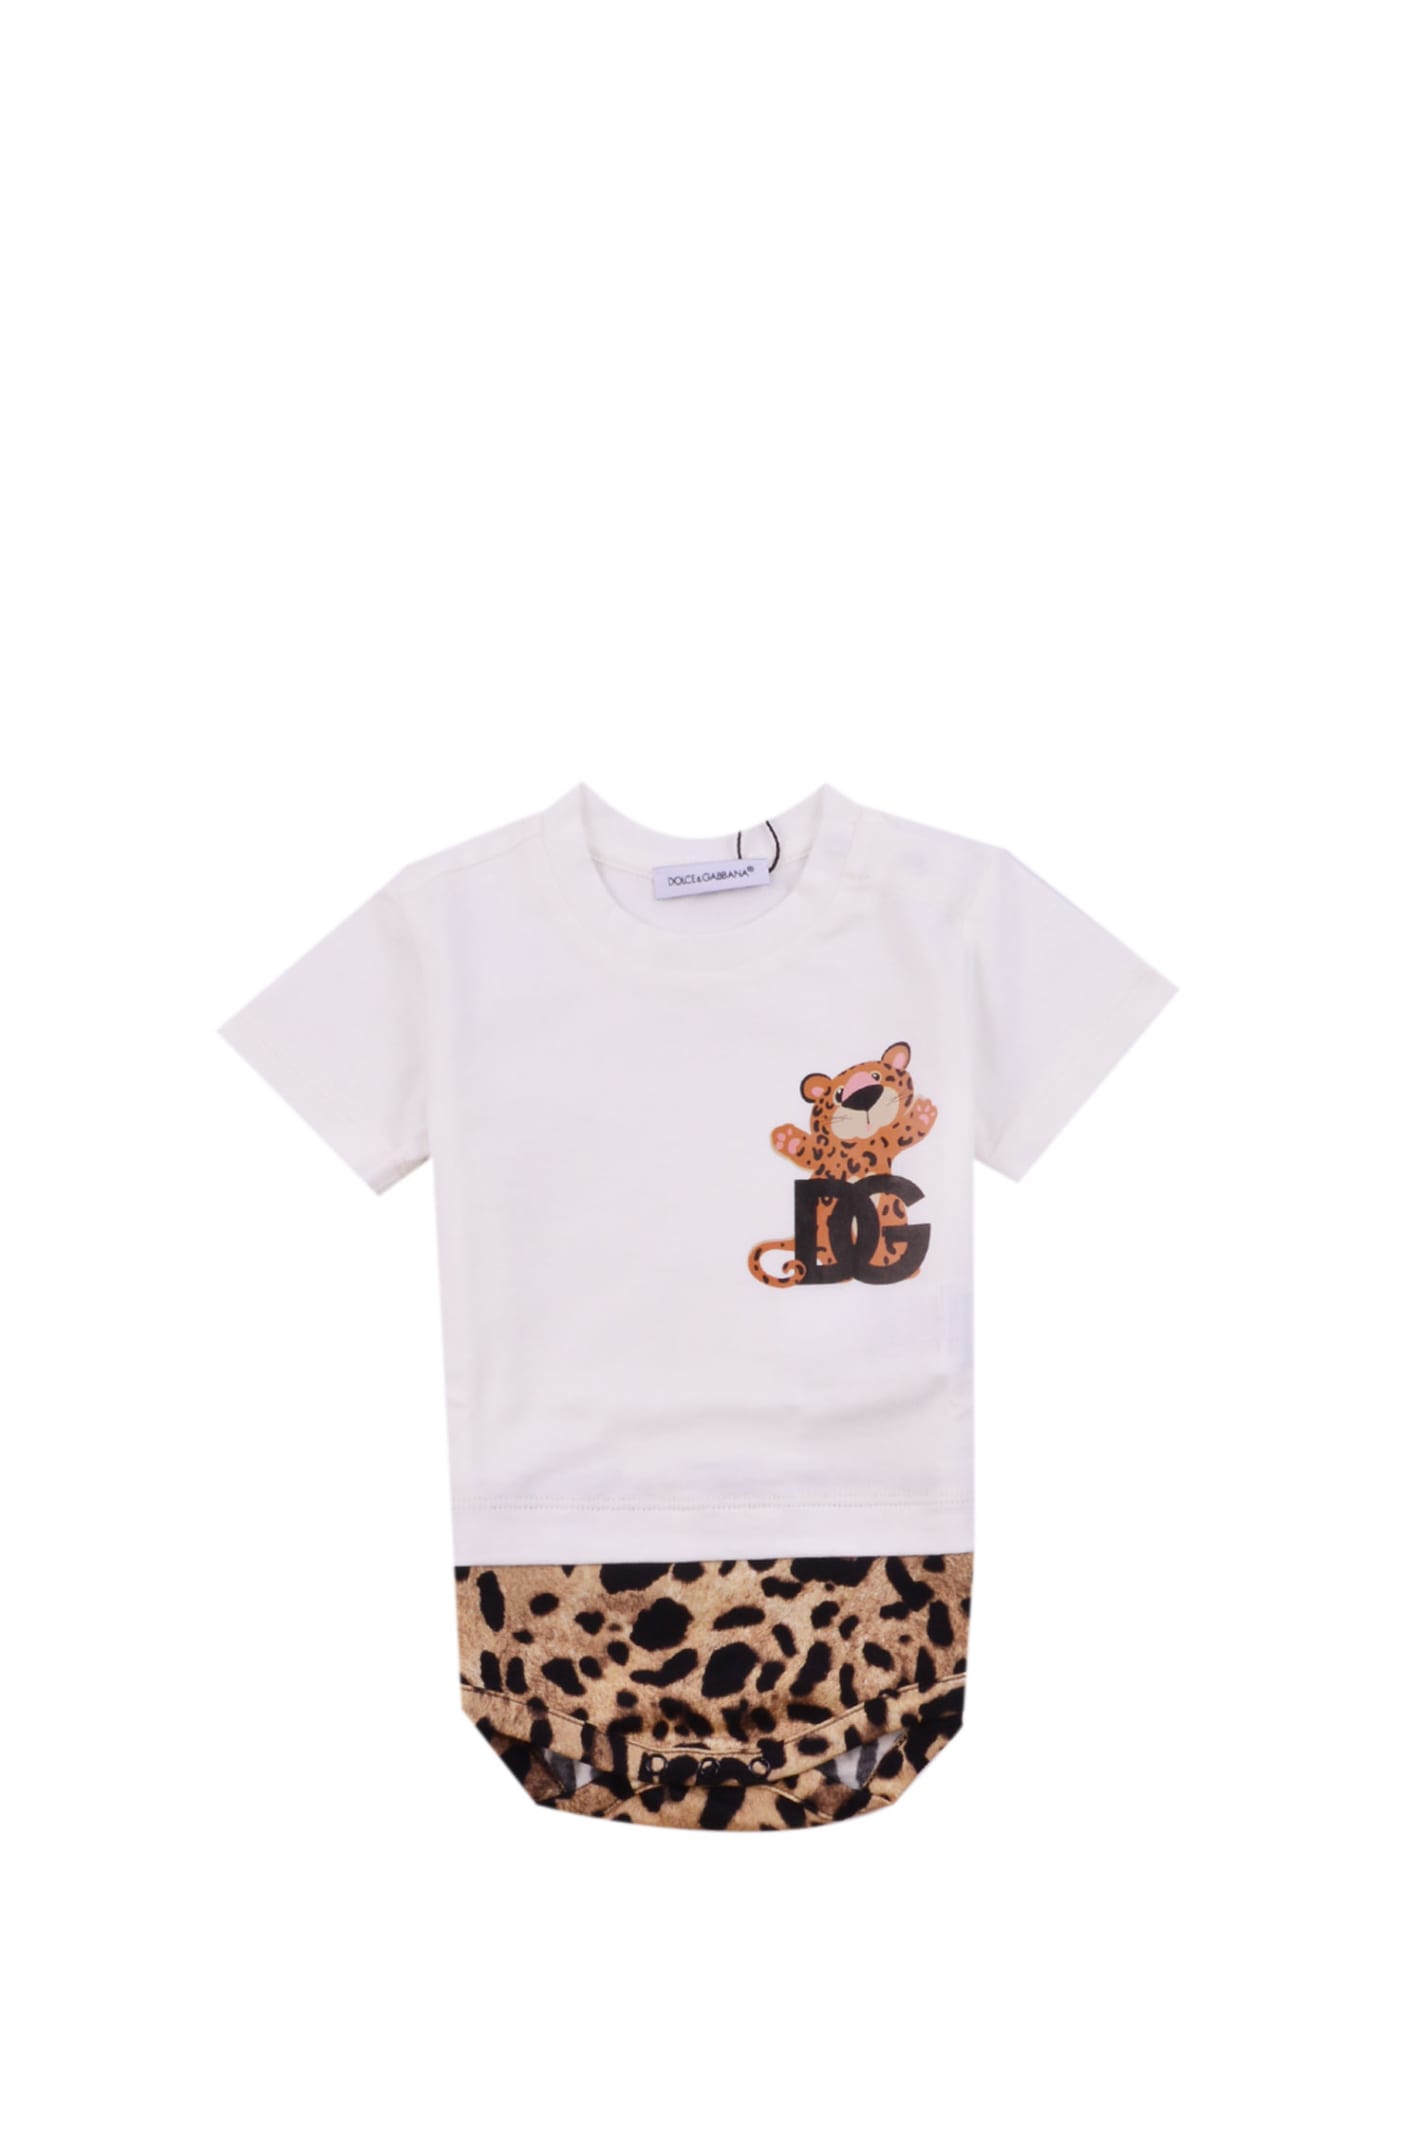 Dolce & Gabbana Babies' Cotton Romper With Print In White